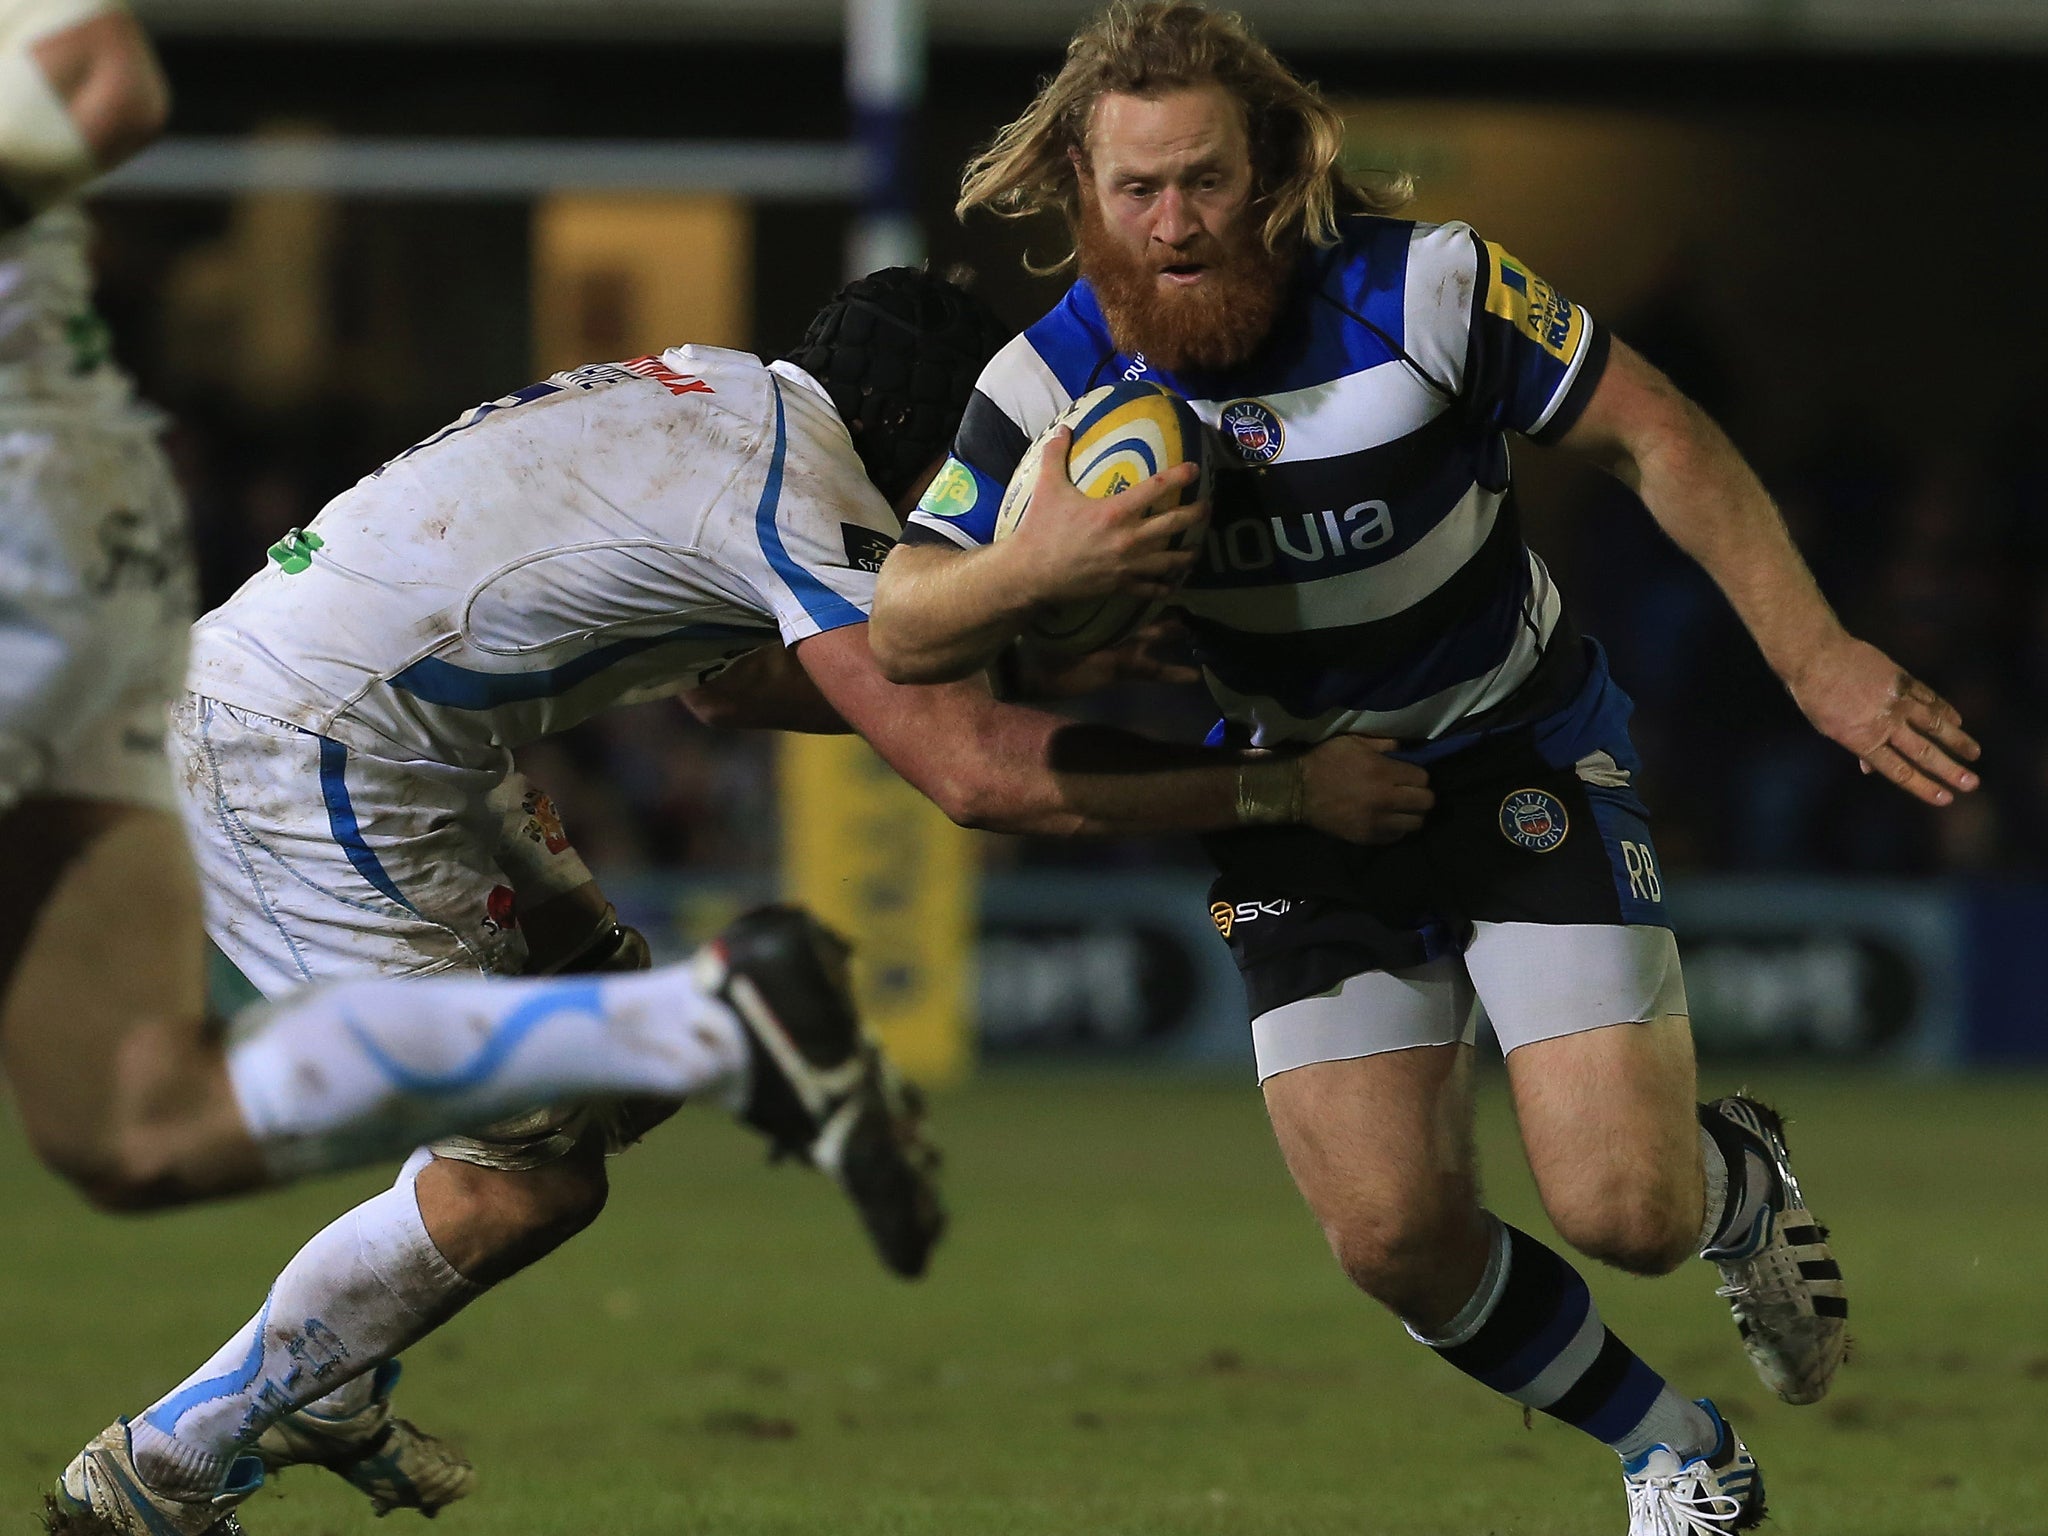 Bath's Ross Batty charges past Exeter's Dean Mumm